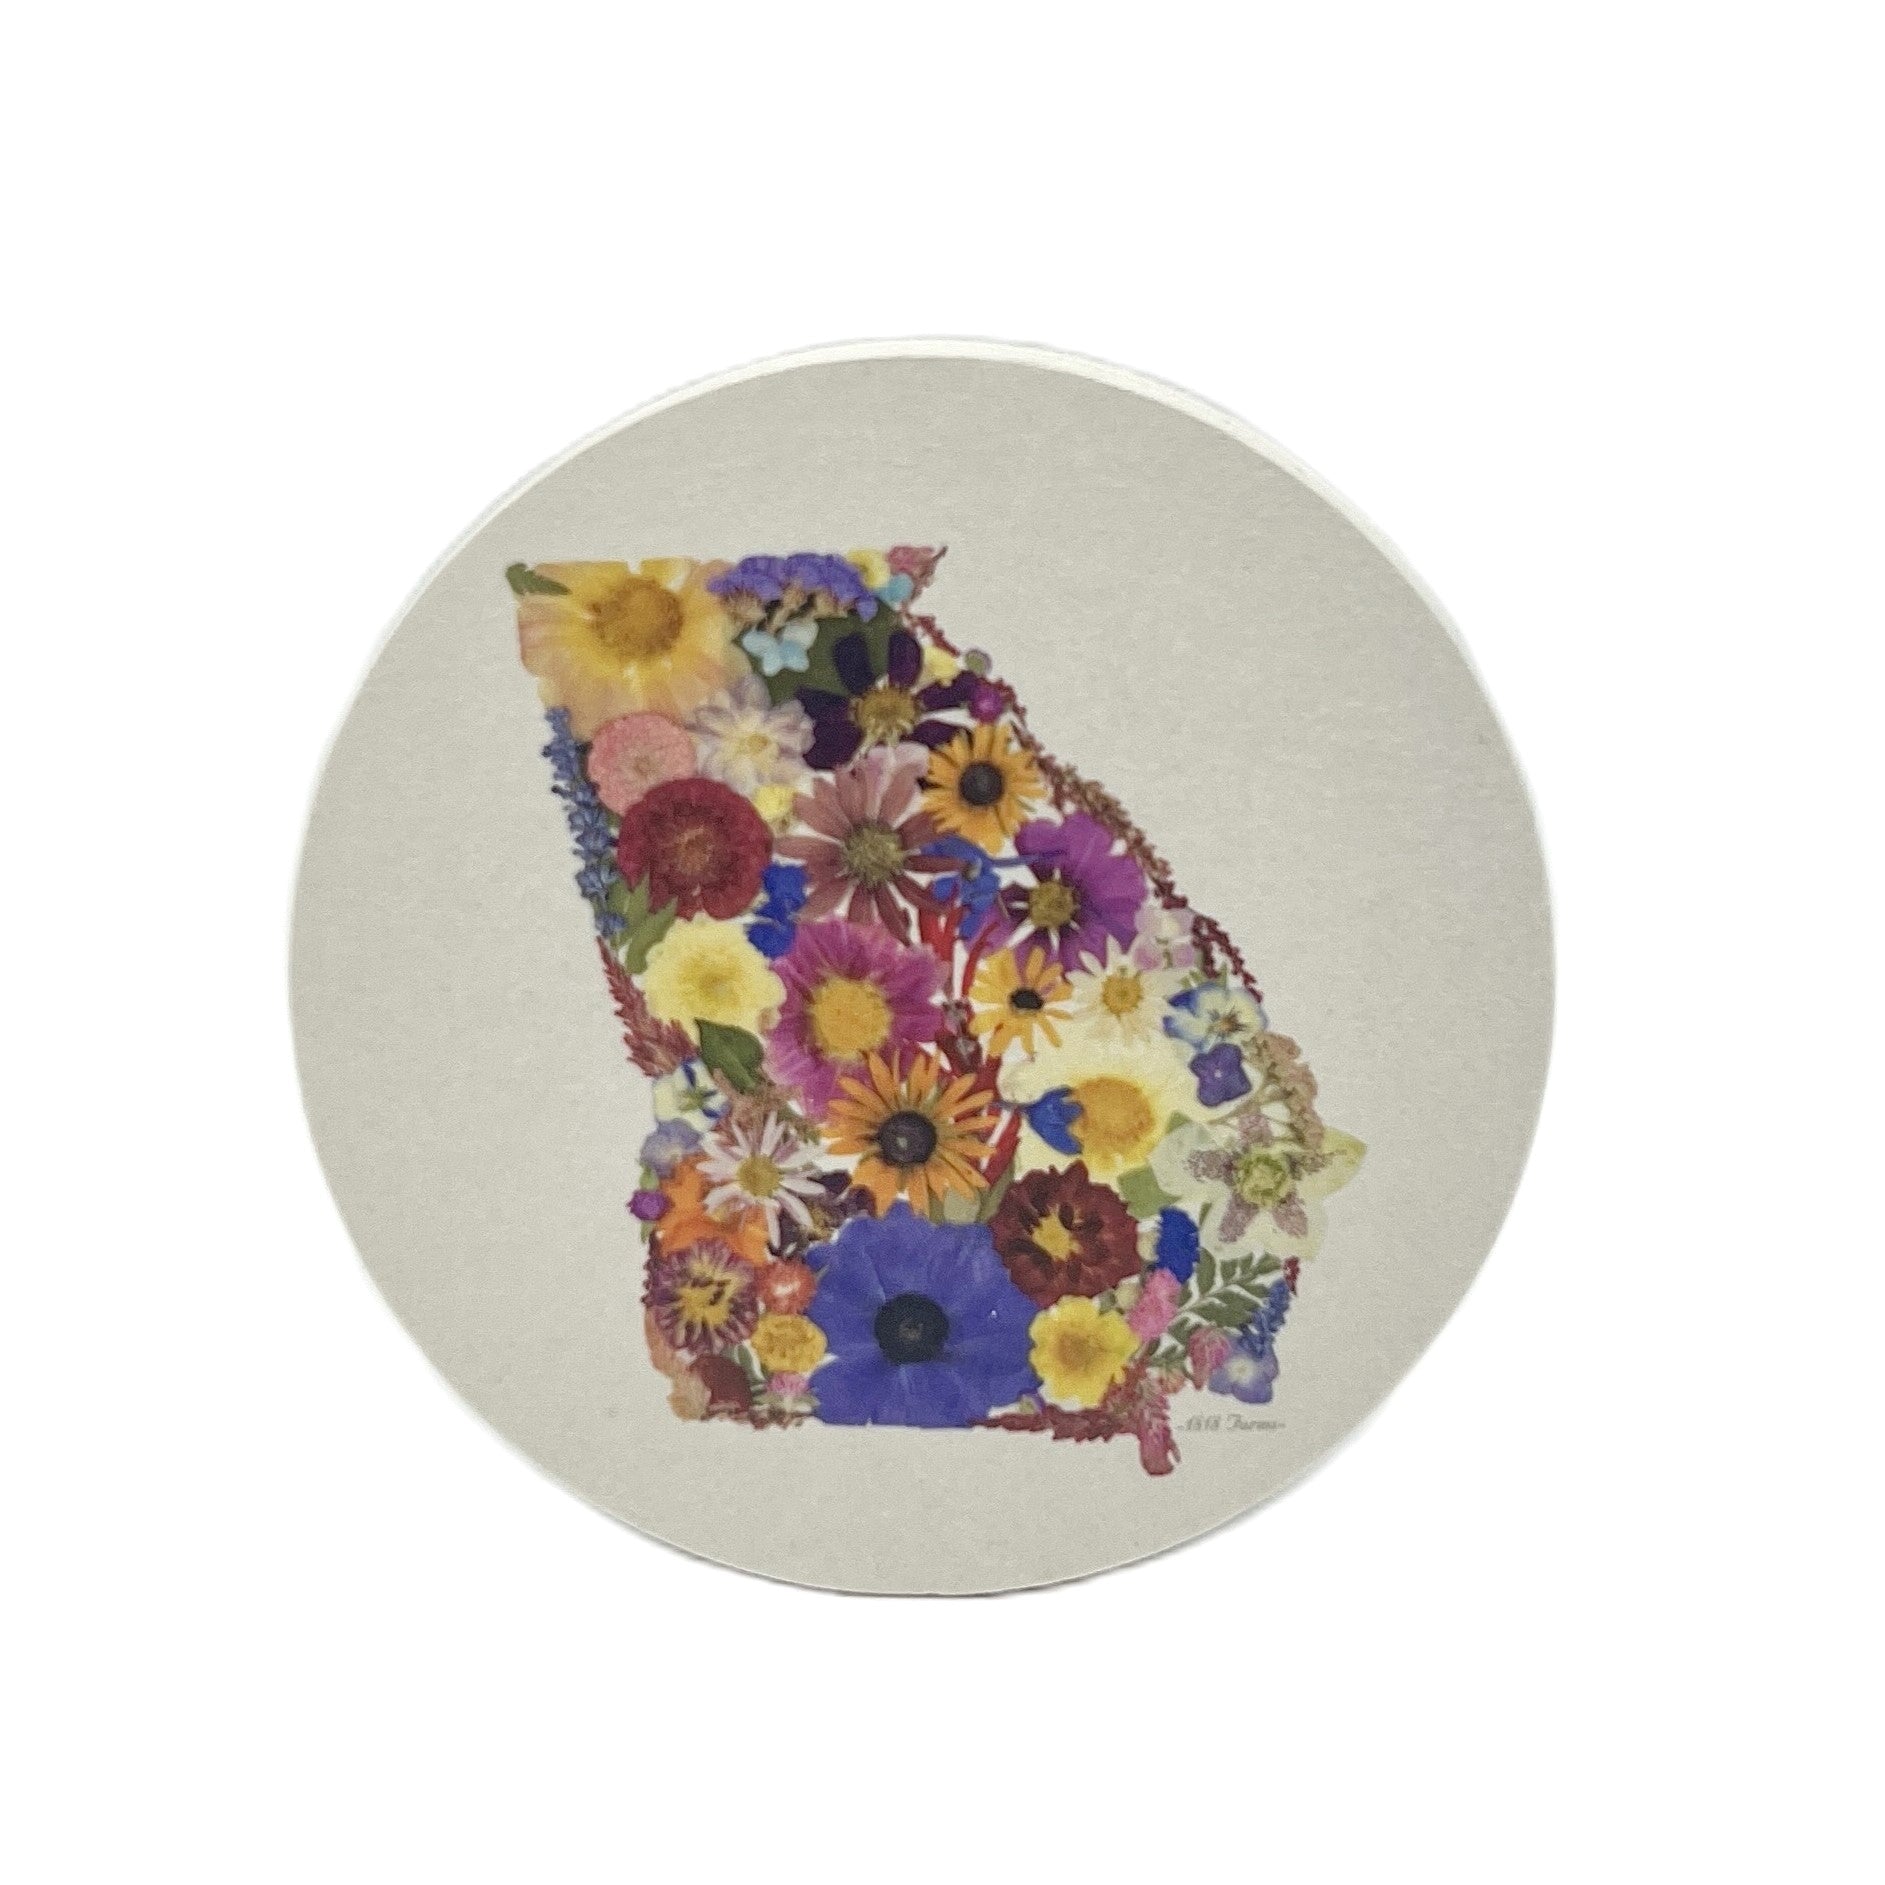 State Themed Drink Coasters (Set of 6)  - "Where I Bloom" Collection Coaster 1818 Farms Georgia  